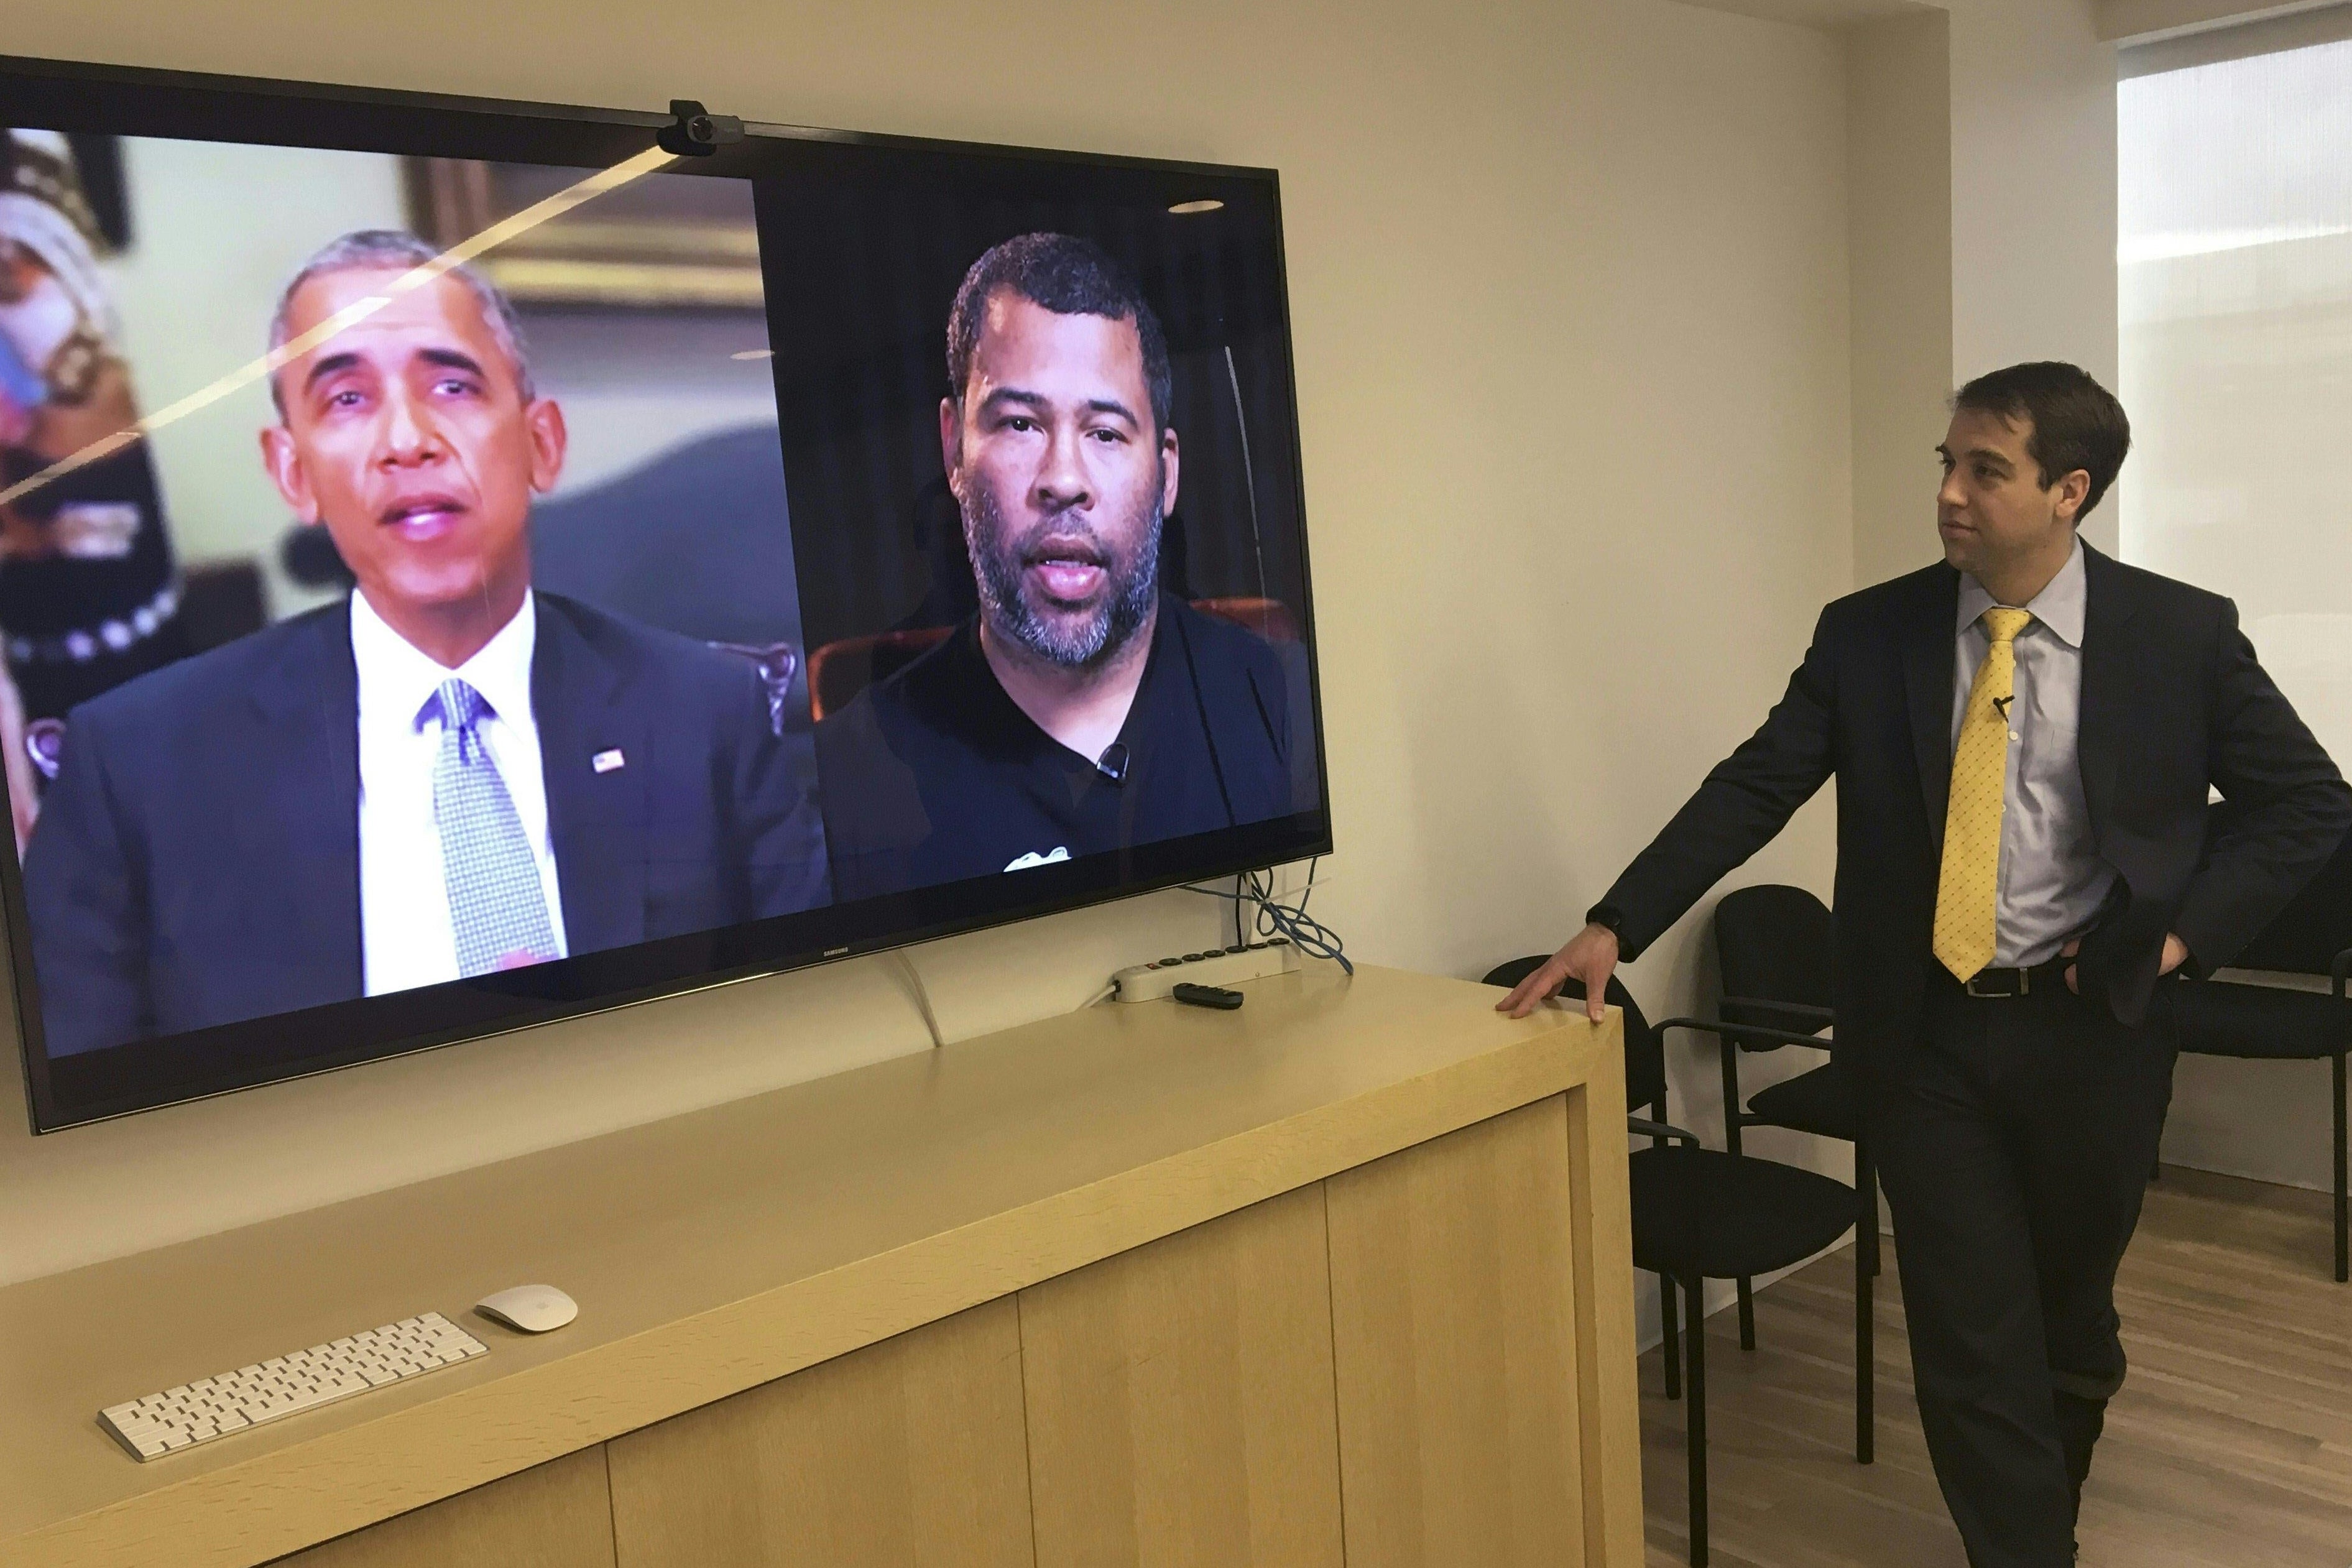 Vice President and Director of Studies at the Center for a New American Security Paul Scharre views in his offices a deepfake video of Barack Obama, created by filmmaker Jordan Peele.